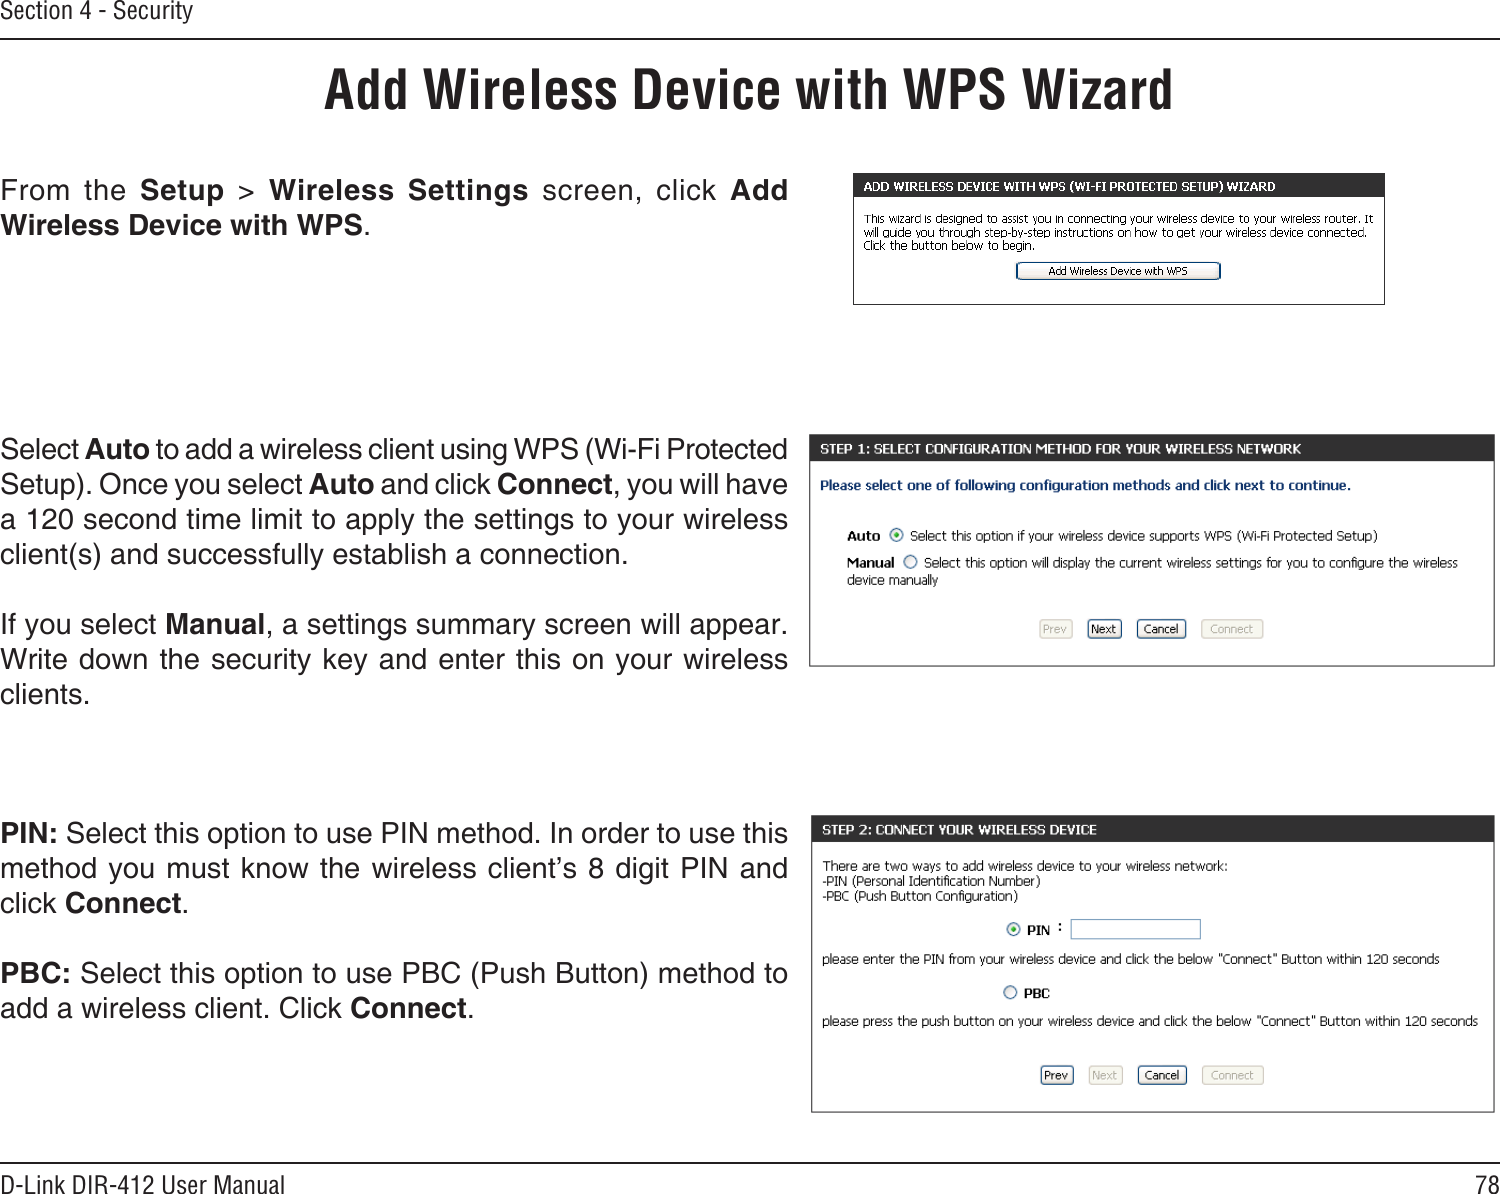 78D-Link DIR-412 User ManualSection 4 - SecurityFrom  the  Setup  &gt;  Wireless  Settings  screen,  click  Add Wireless Device with WPS.Add Wireless Device with WPS WizardPIN: Select this option to use PIN method. In order to use this method you must know the wireless client’s 8 digit PIN and click Connect.PBC: Select this option to use PBC (Push Button) method to add a wireless client. Click Connect.Select Auto to add a wireless client using WPS (Wi-Fi Protected Setup). Once you select Auto and click Connect, you will have a 120 second time limit to apply the settings to your wireless client(s) and successfully establish a connection. If you select Manual, a settings summary screen will appear. Write down the security key and enter this on your wireless clients. 